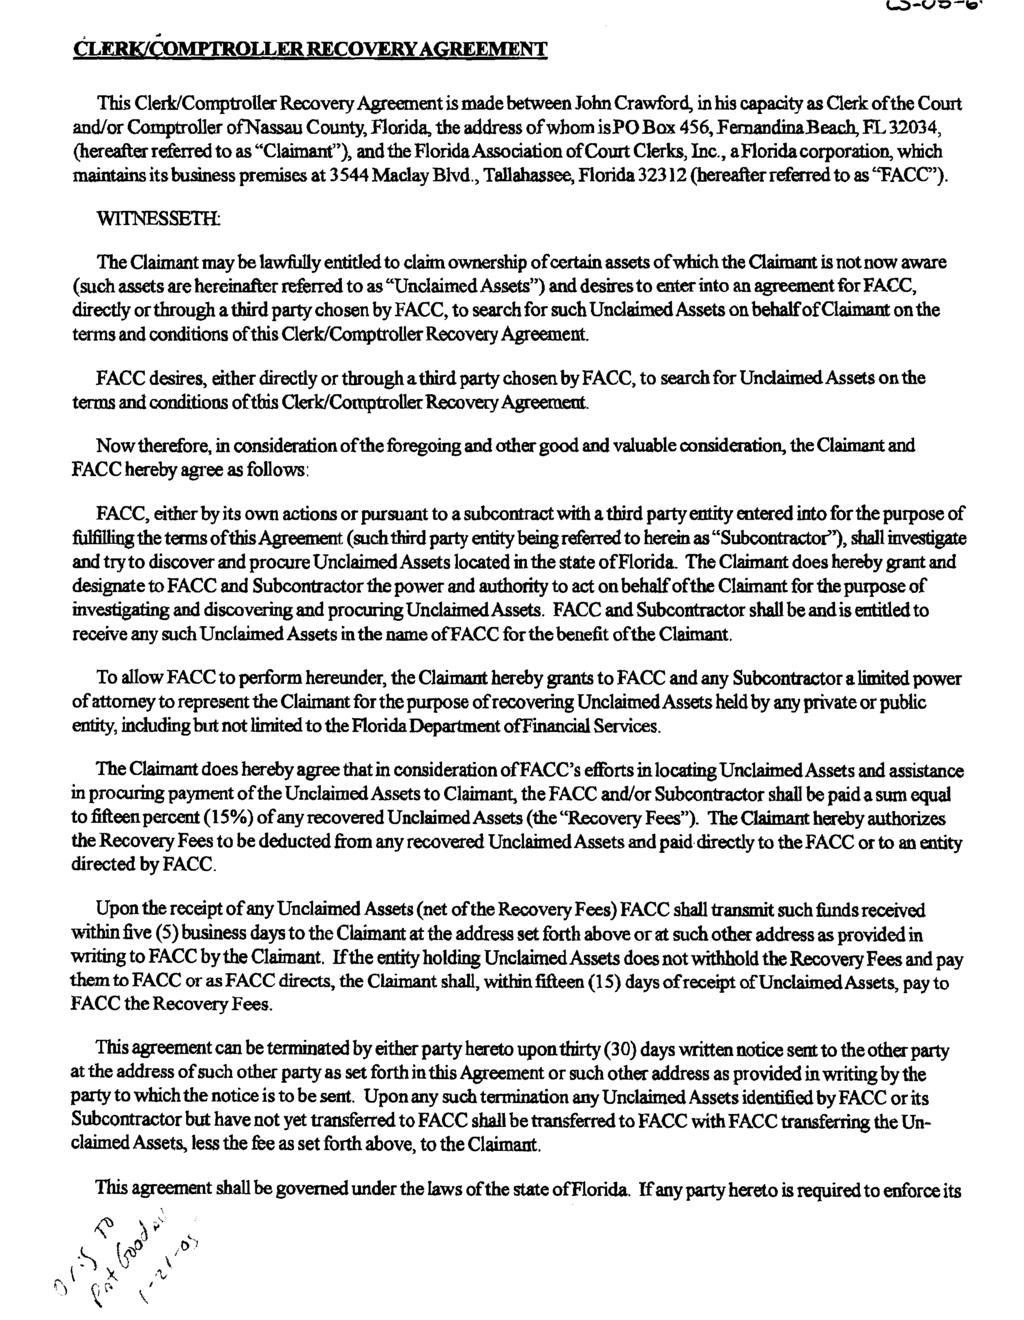 a CLERWCOMPTROLLER RECOVERY AGREEMENT This ClerklComptroUea- Recovery Agreement is made between John Crawford, in his capacity as Clerk ofthe Court andlor Comptroller ofnssau County, Florida, the